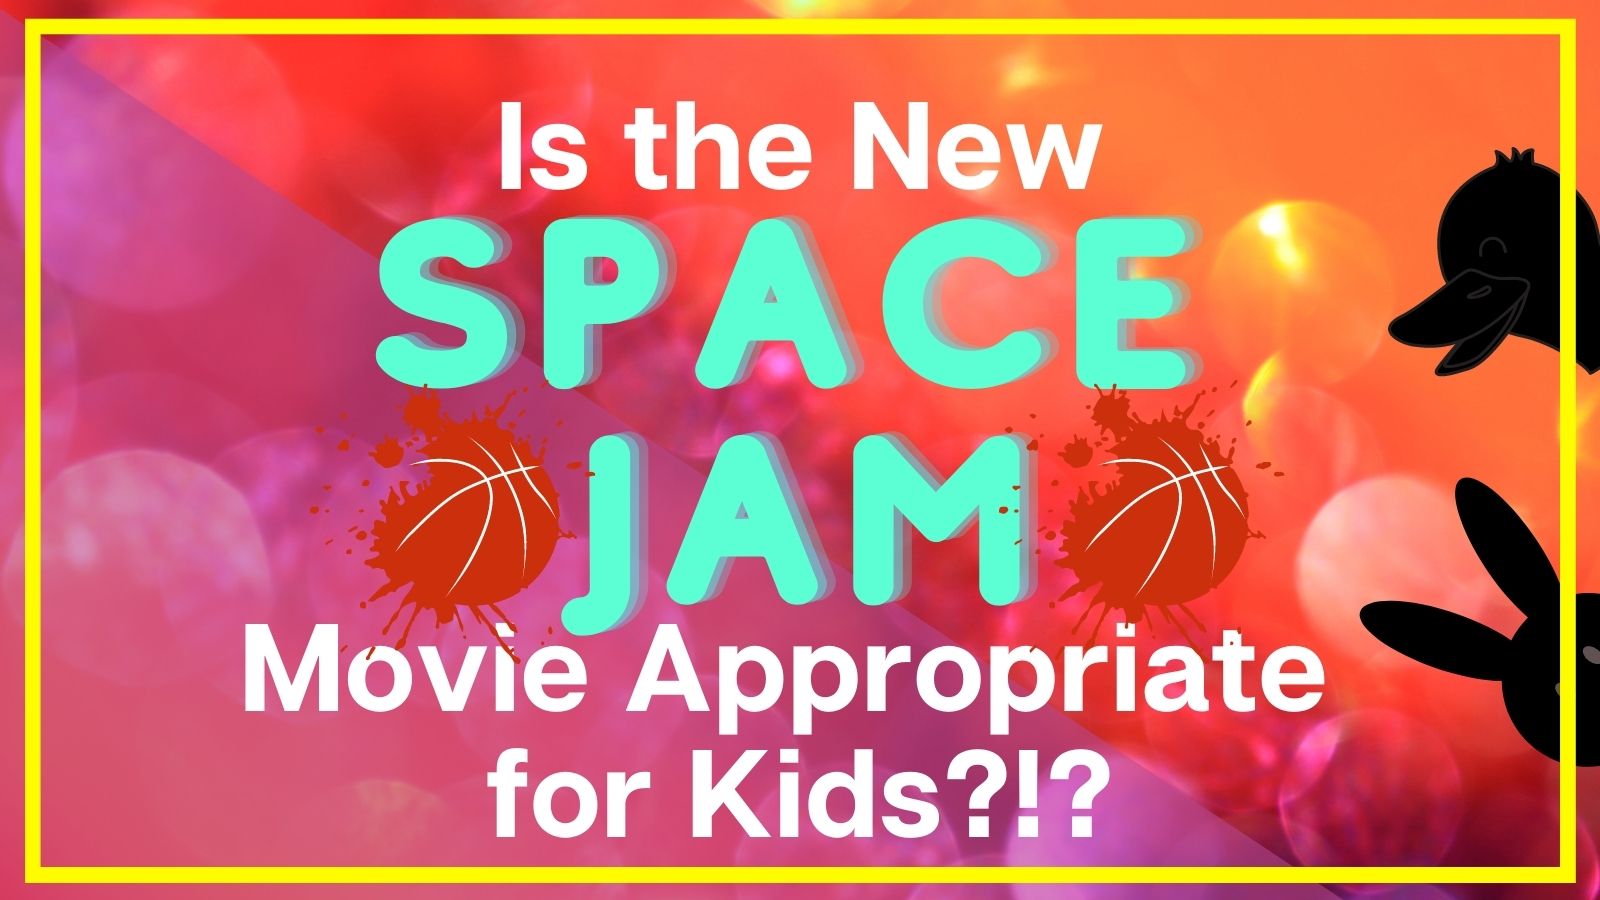 Is the New Space Jam Movie Appropriate for Kids? Text on bright orange background